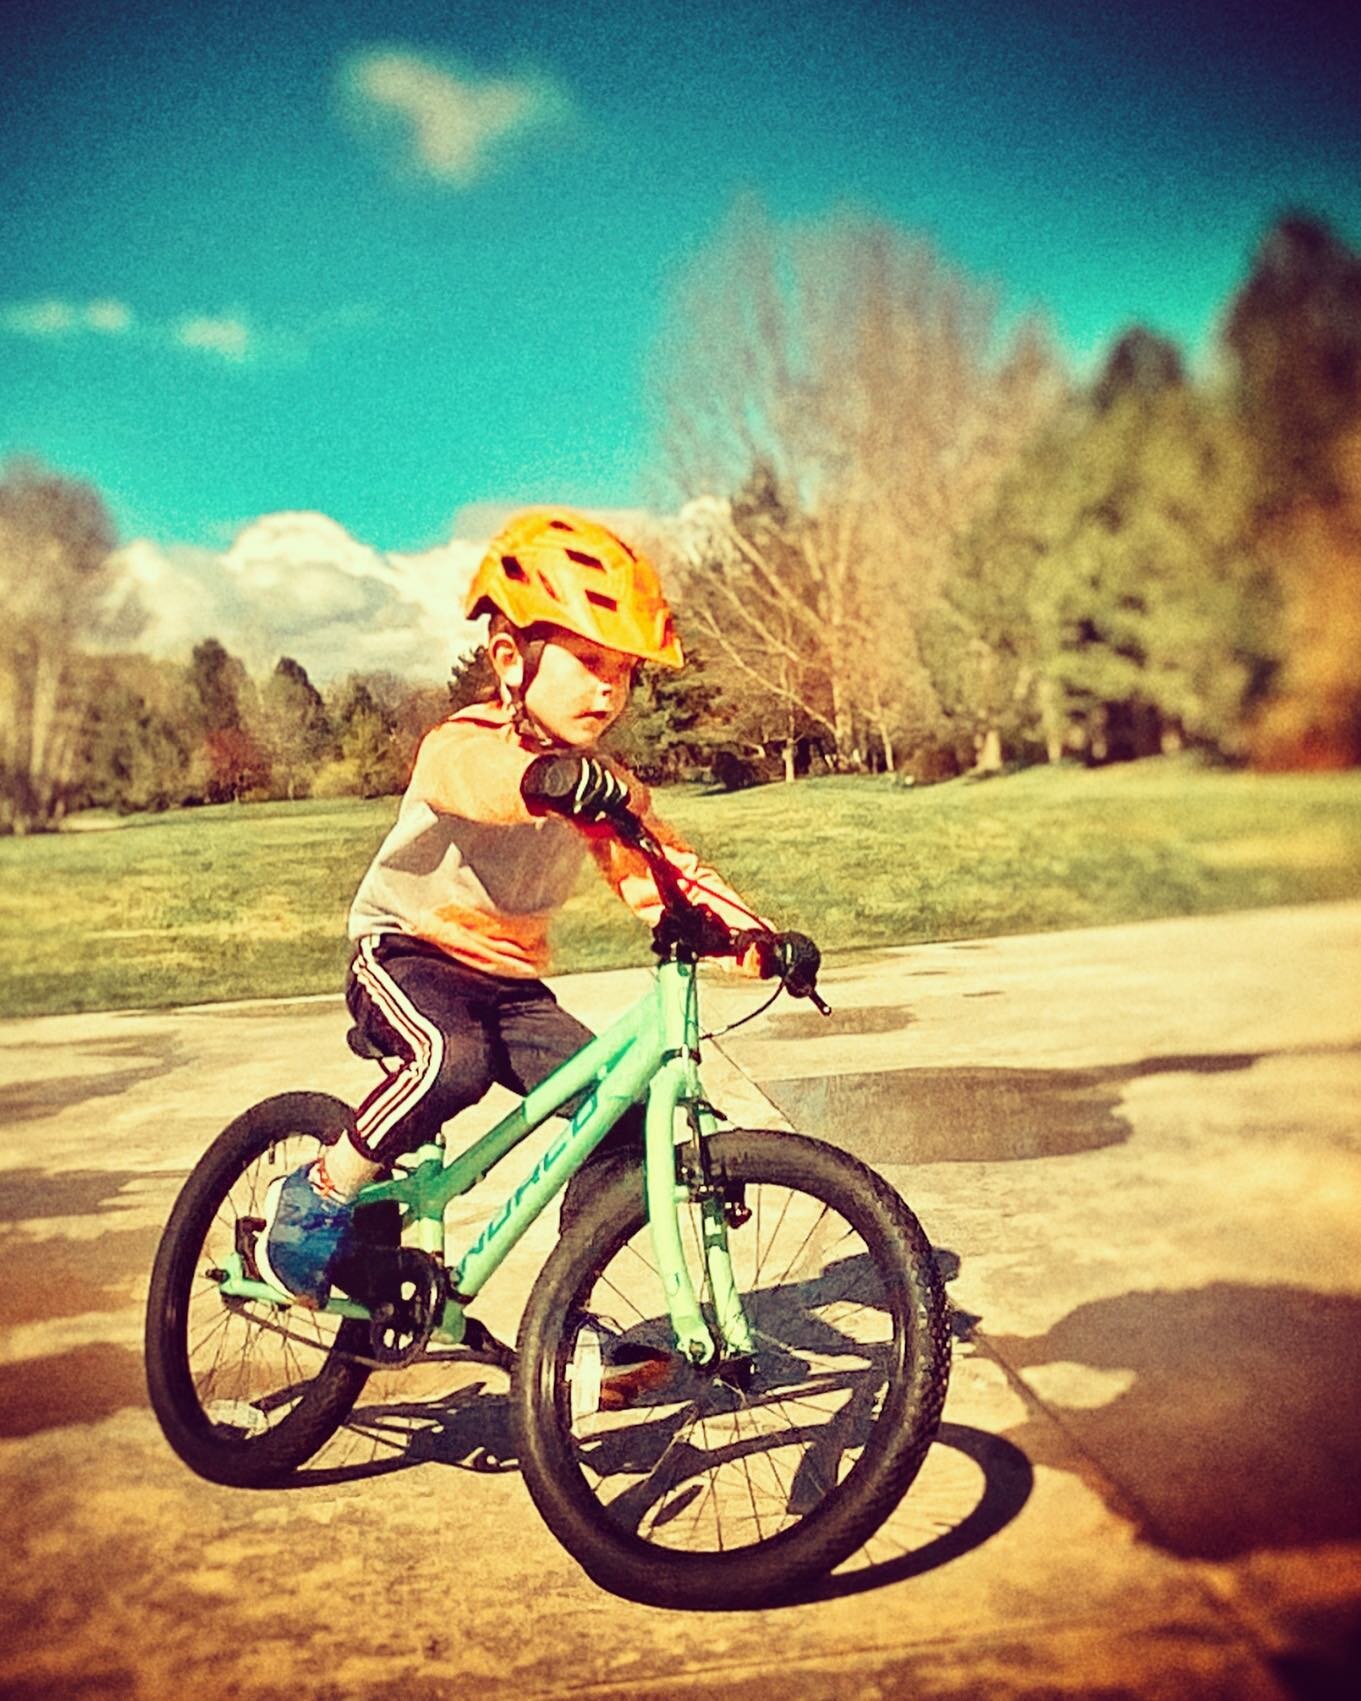 Great attitude and awesome instincts: doubt I&rsquo;ll be able to keep up with this guy for long. 
#newkidintown #kidpower #bikefever #mtblife #mtb #letsbike #norcobikes #eastsidecyclesboiseid #boise #idaho #boiseidaho #boiseid #iphone11 #snapseed #b